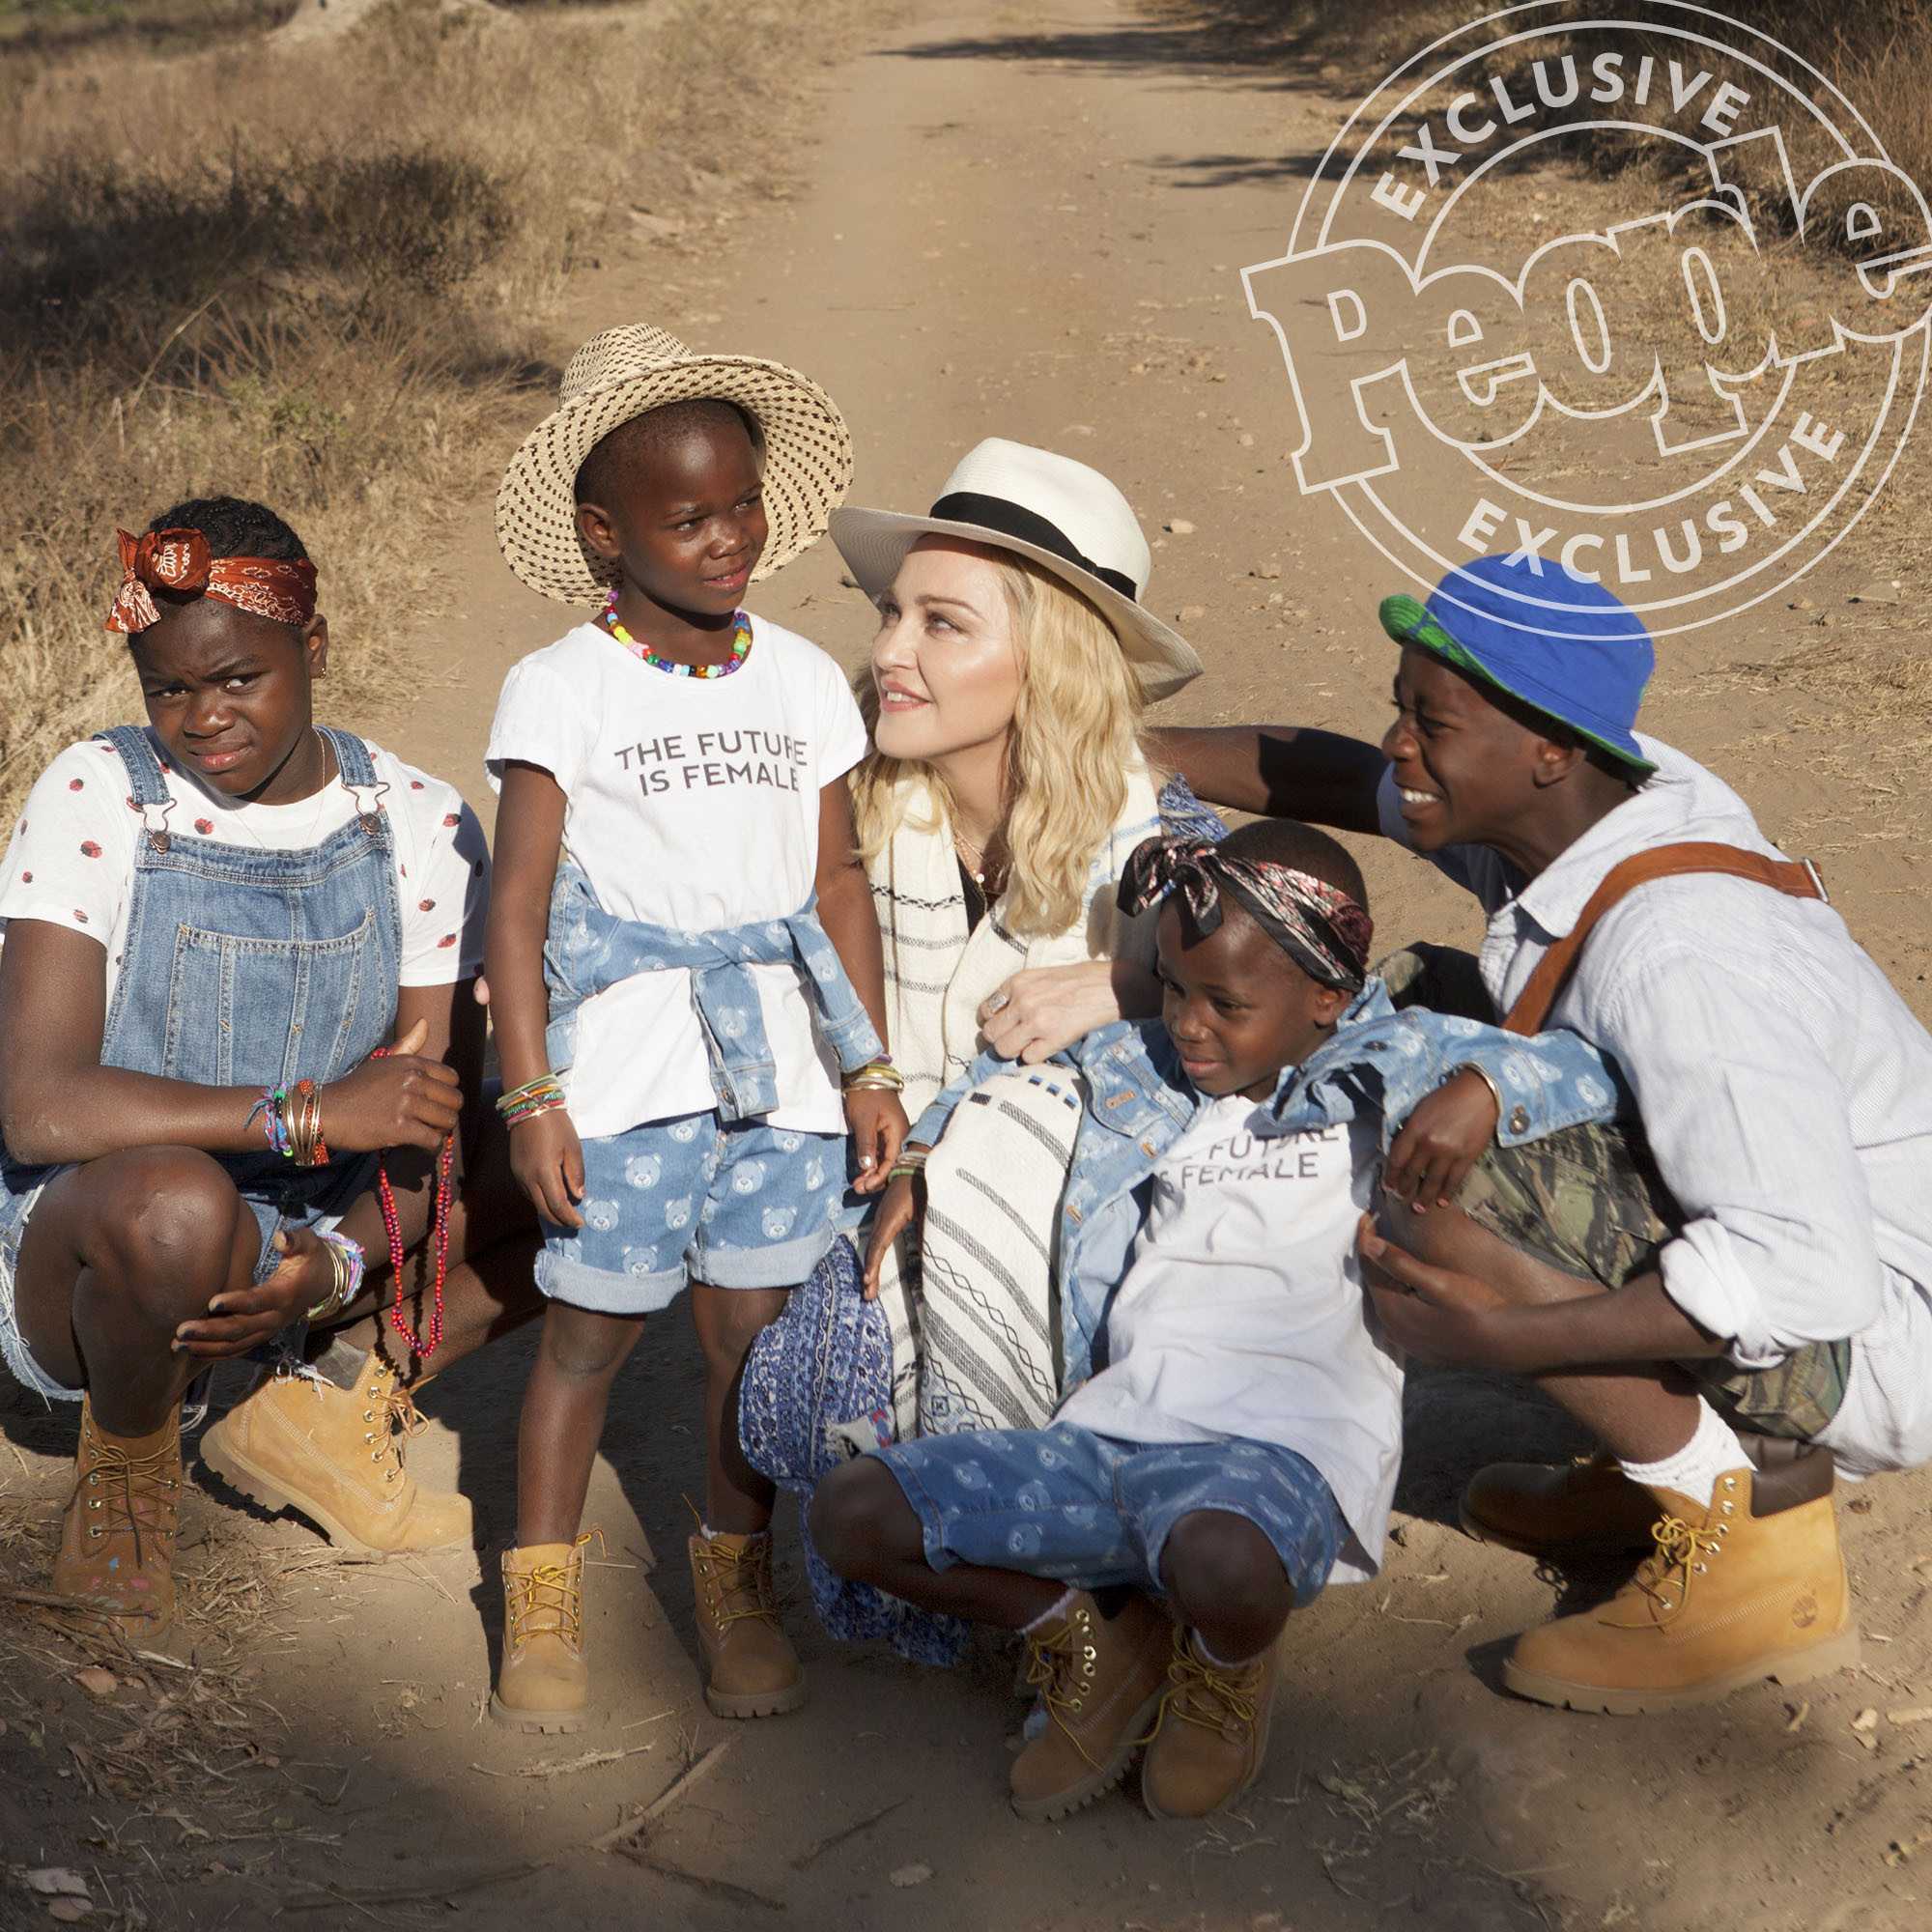 Madonna and family. daughter Mercy James, Son David Banda, twins Estere (with scarf around head as headband) and Stella (in hat) Older kids Rocco & Lourdes Photographed in Malawi at for the opening of Madonna's new hospital there. July 2017. Credit: Shavawn Rissman Do not use without permission from: Approval required for reuse! Brian Bumbery 323.904.9094 Sara Zambreno 310-918-9070